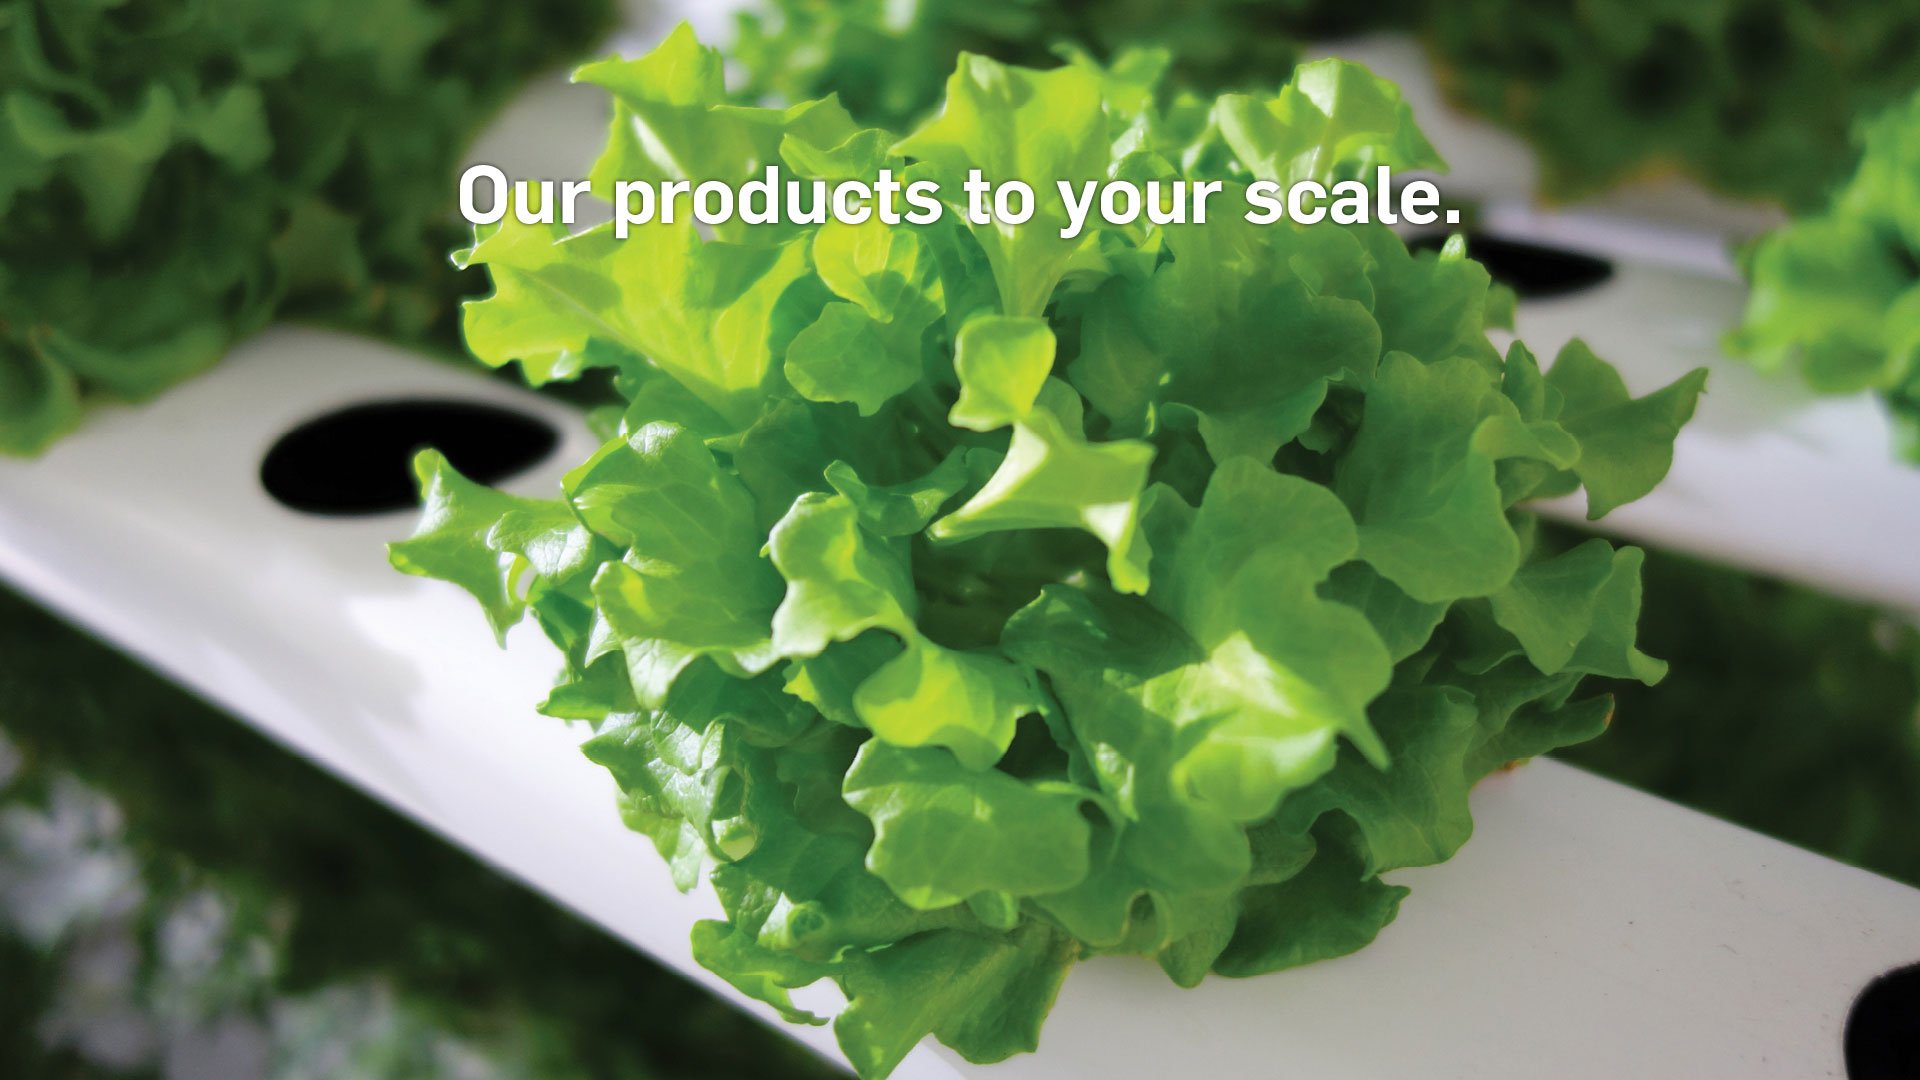 Our products to your scale